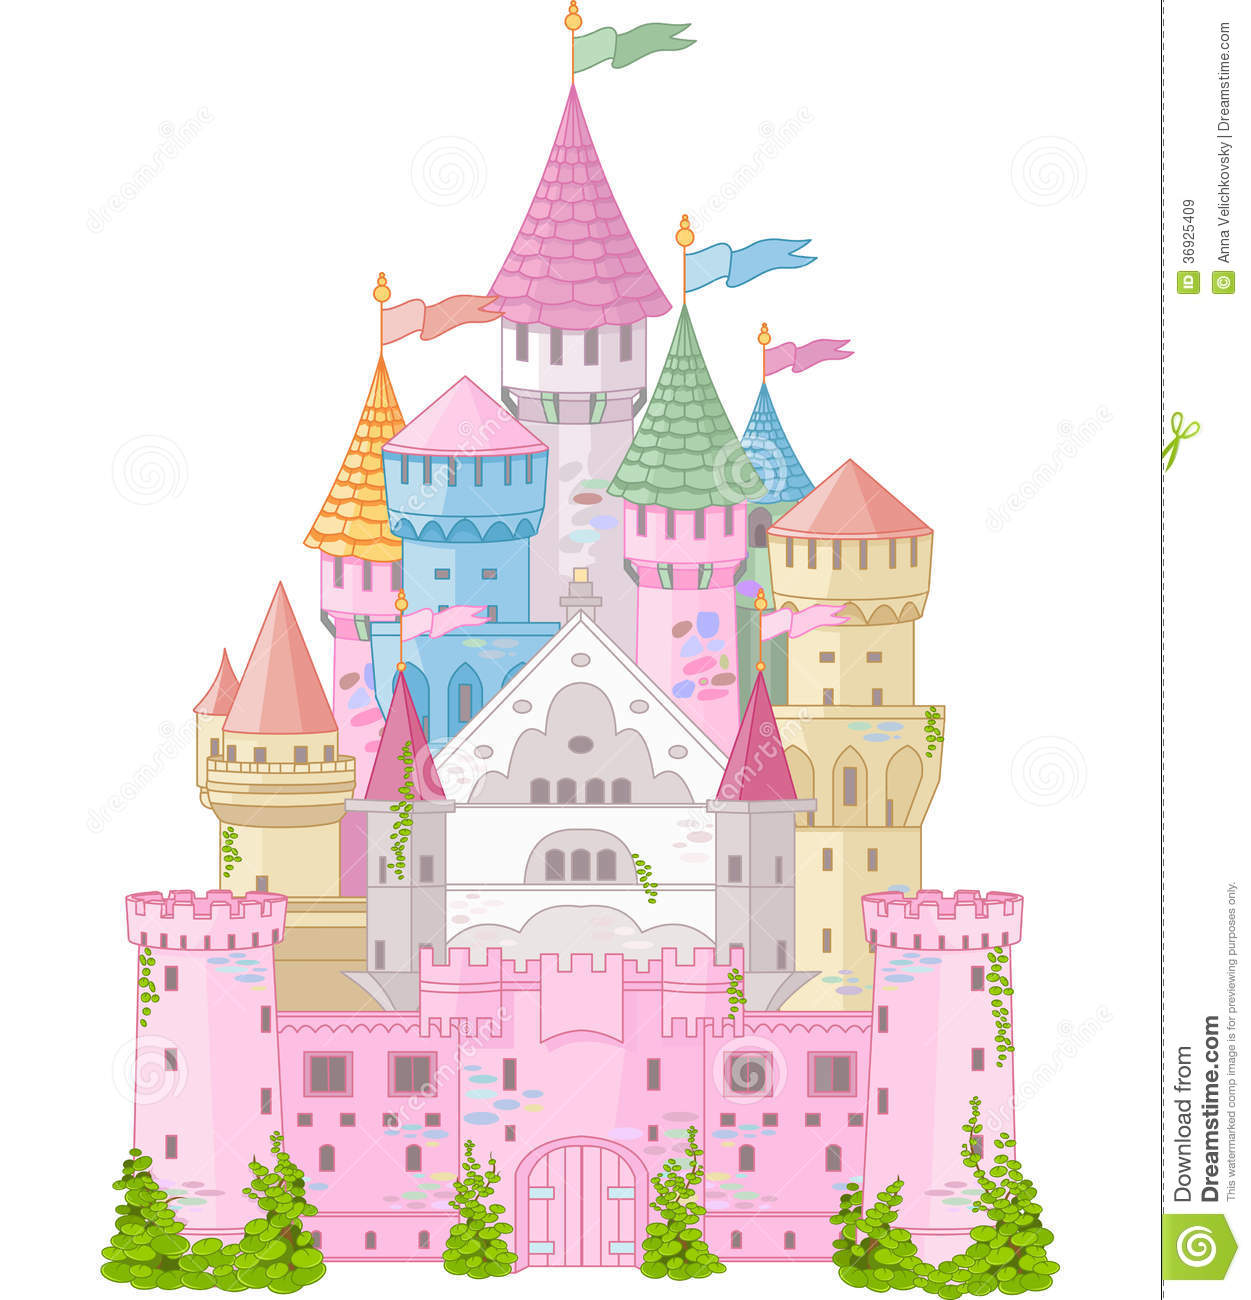 Fairy Tale Castle Royalty Free Stock Images   Image  36925409